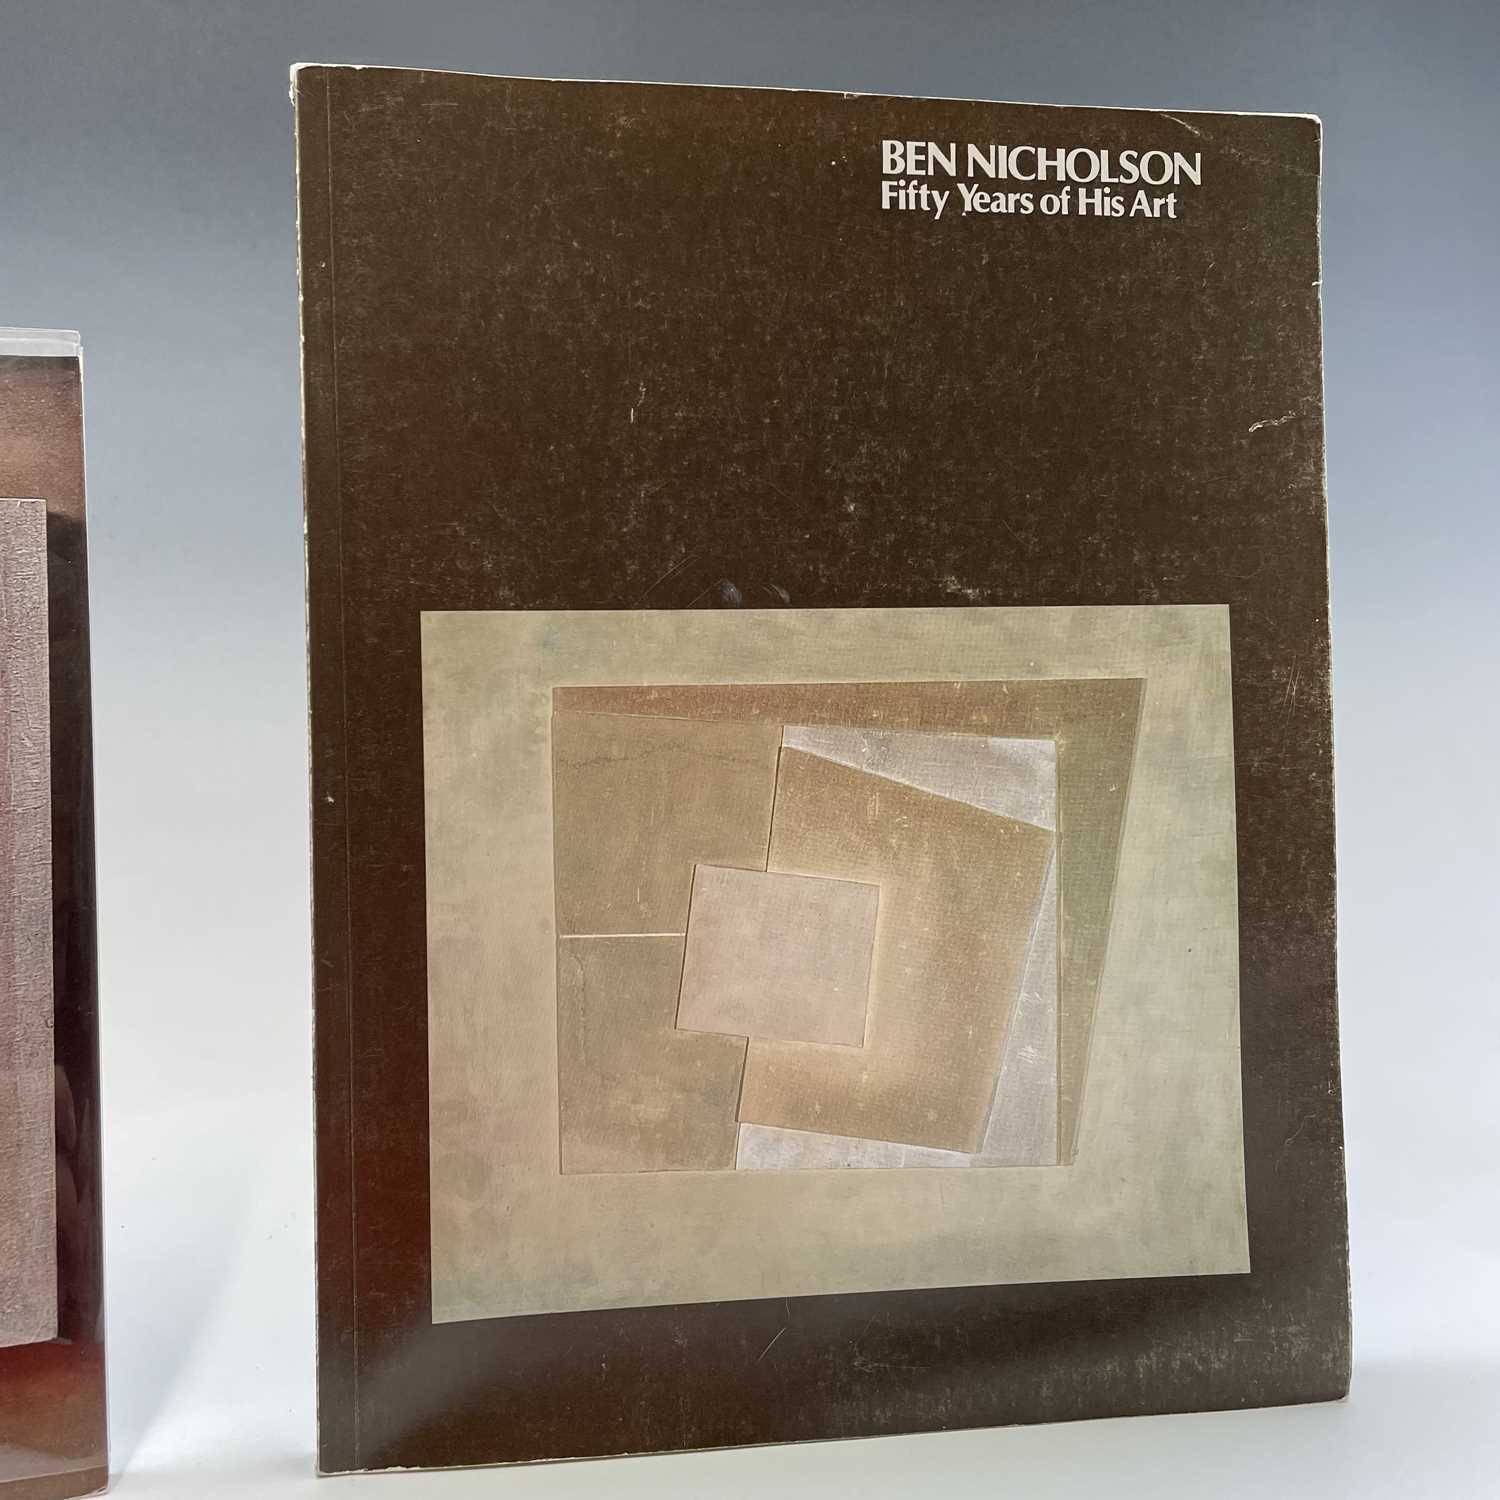 Three Ben Nicholson publications 'Ben Nicholson: the meaning of his art' by J. P. Hodin, hardback, - Image 2 of 7